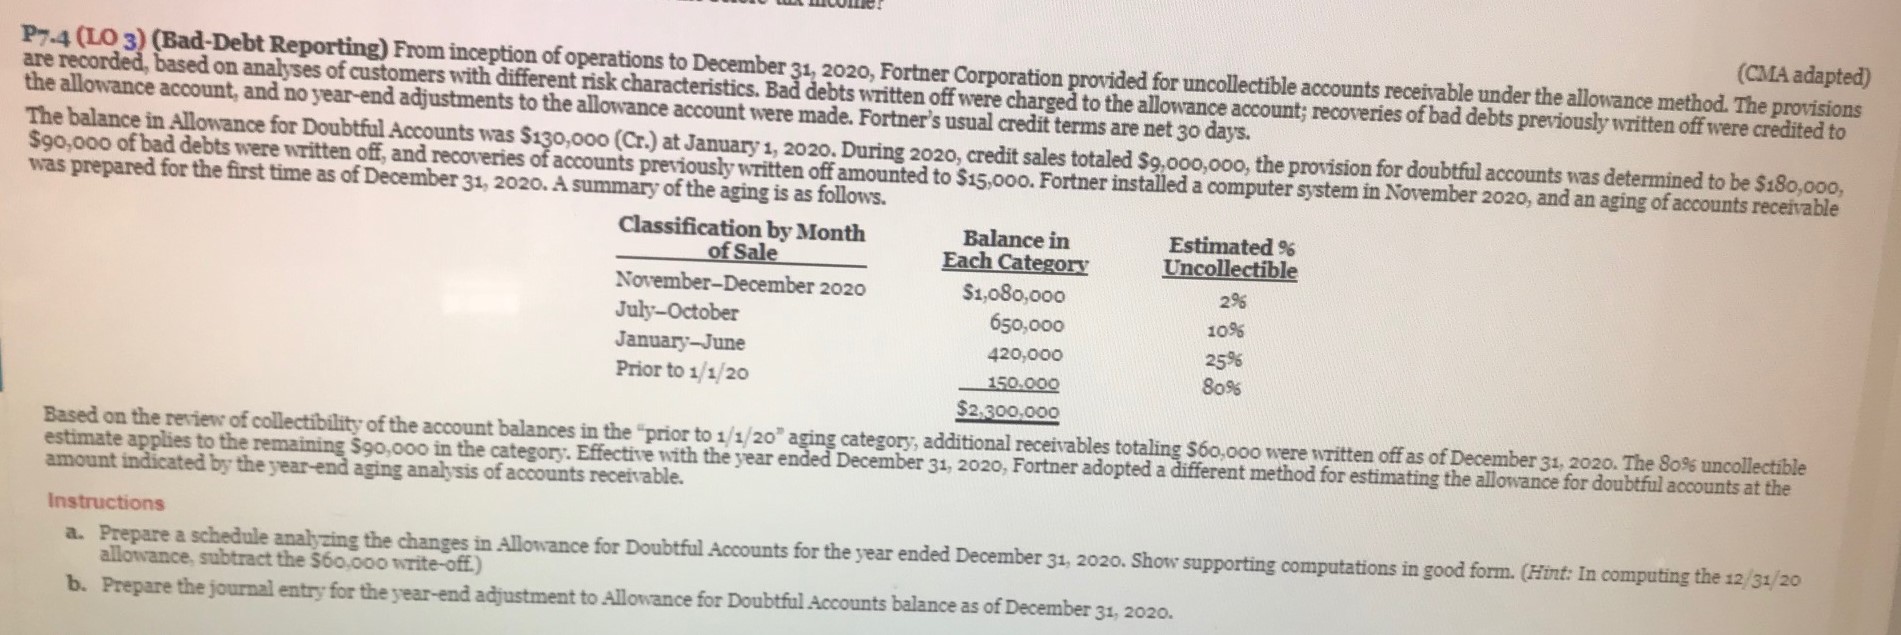 P7.4 (LO 3) (Bad-Debt Reporting) From inception of operations to December 31, 2020, Fortner Corporation provided for uncollectible accounts receivable under the allowance method. The provisions
are recorded, based on analyses of customers with different risk characteristics. Bad debts written off were charged to the allowance account; recoveries of bad debts previously written off were credited 

<div class=